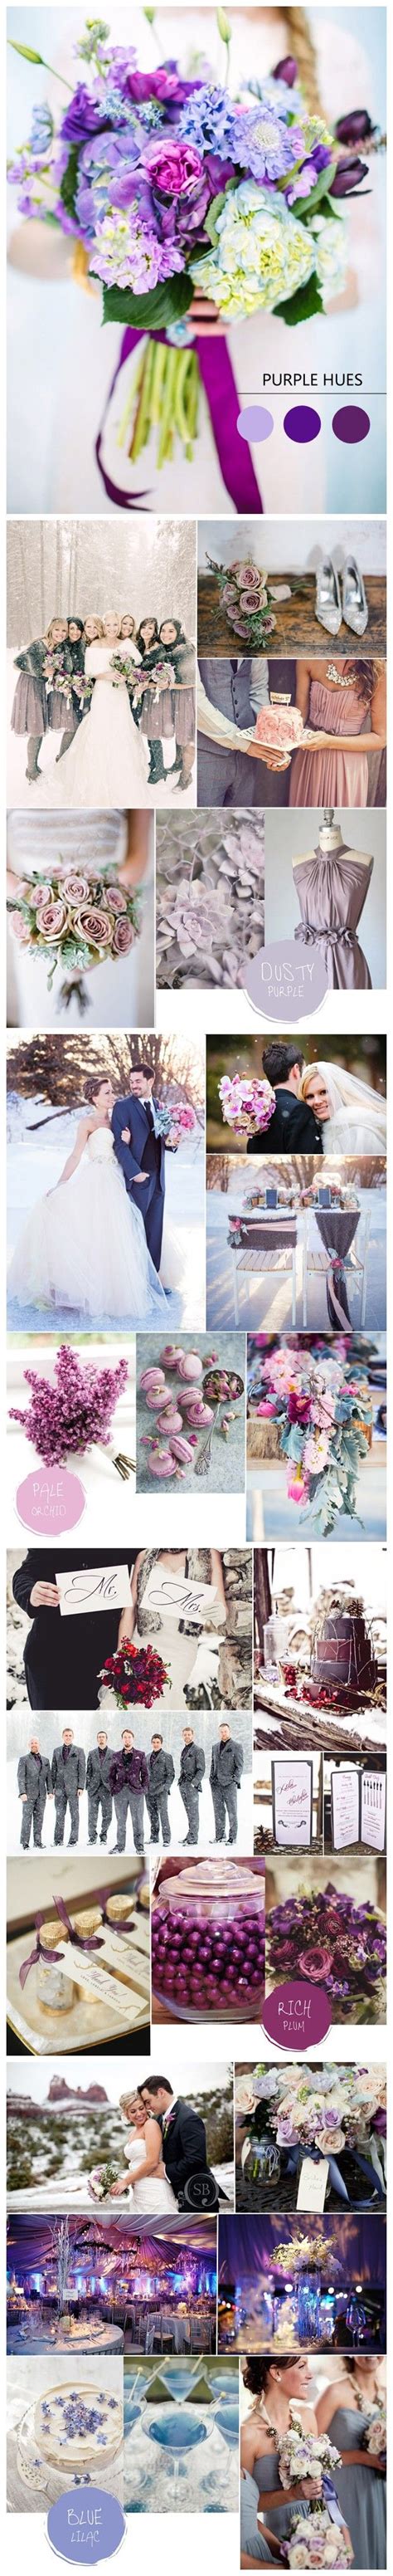 Purple Hues For Winter Wedding Color Ideas And Bridesmaid Dresses 2014